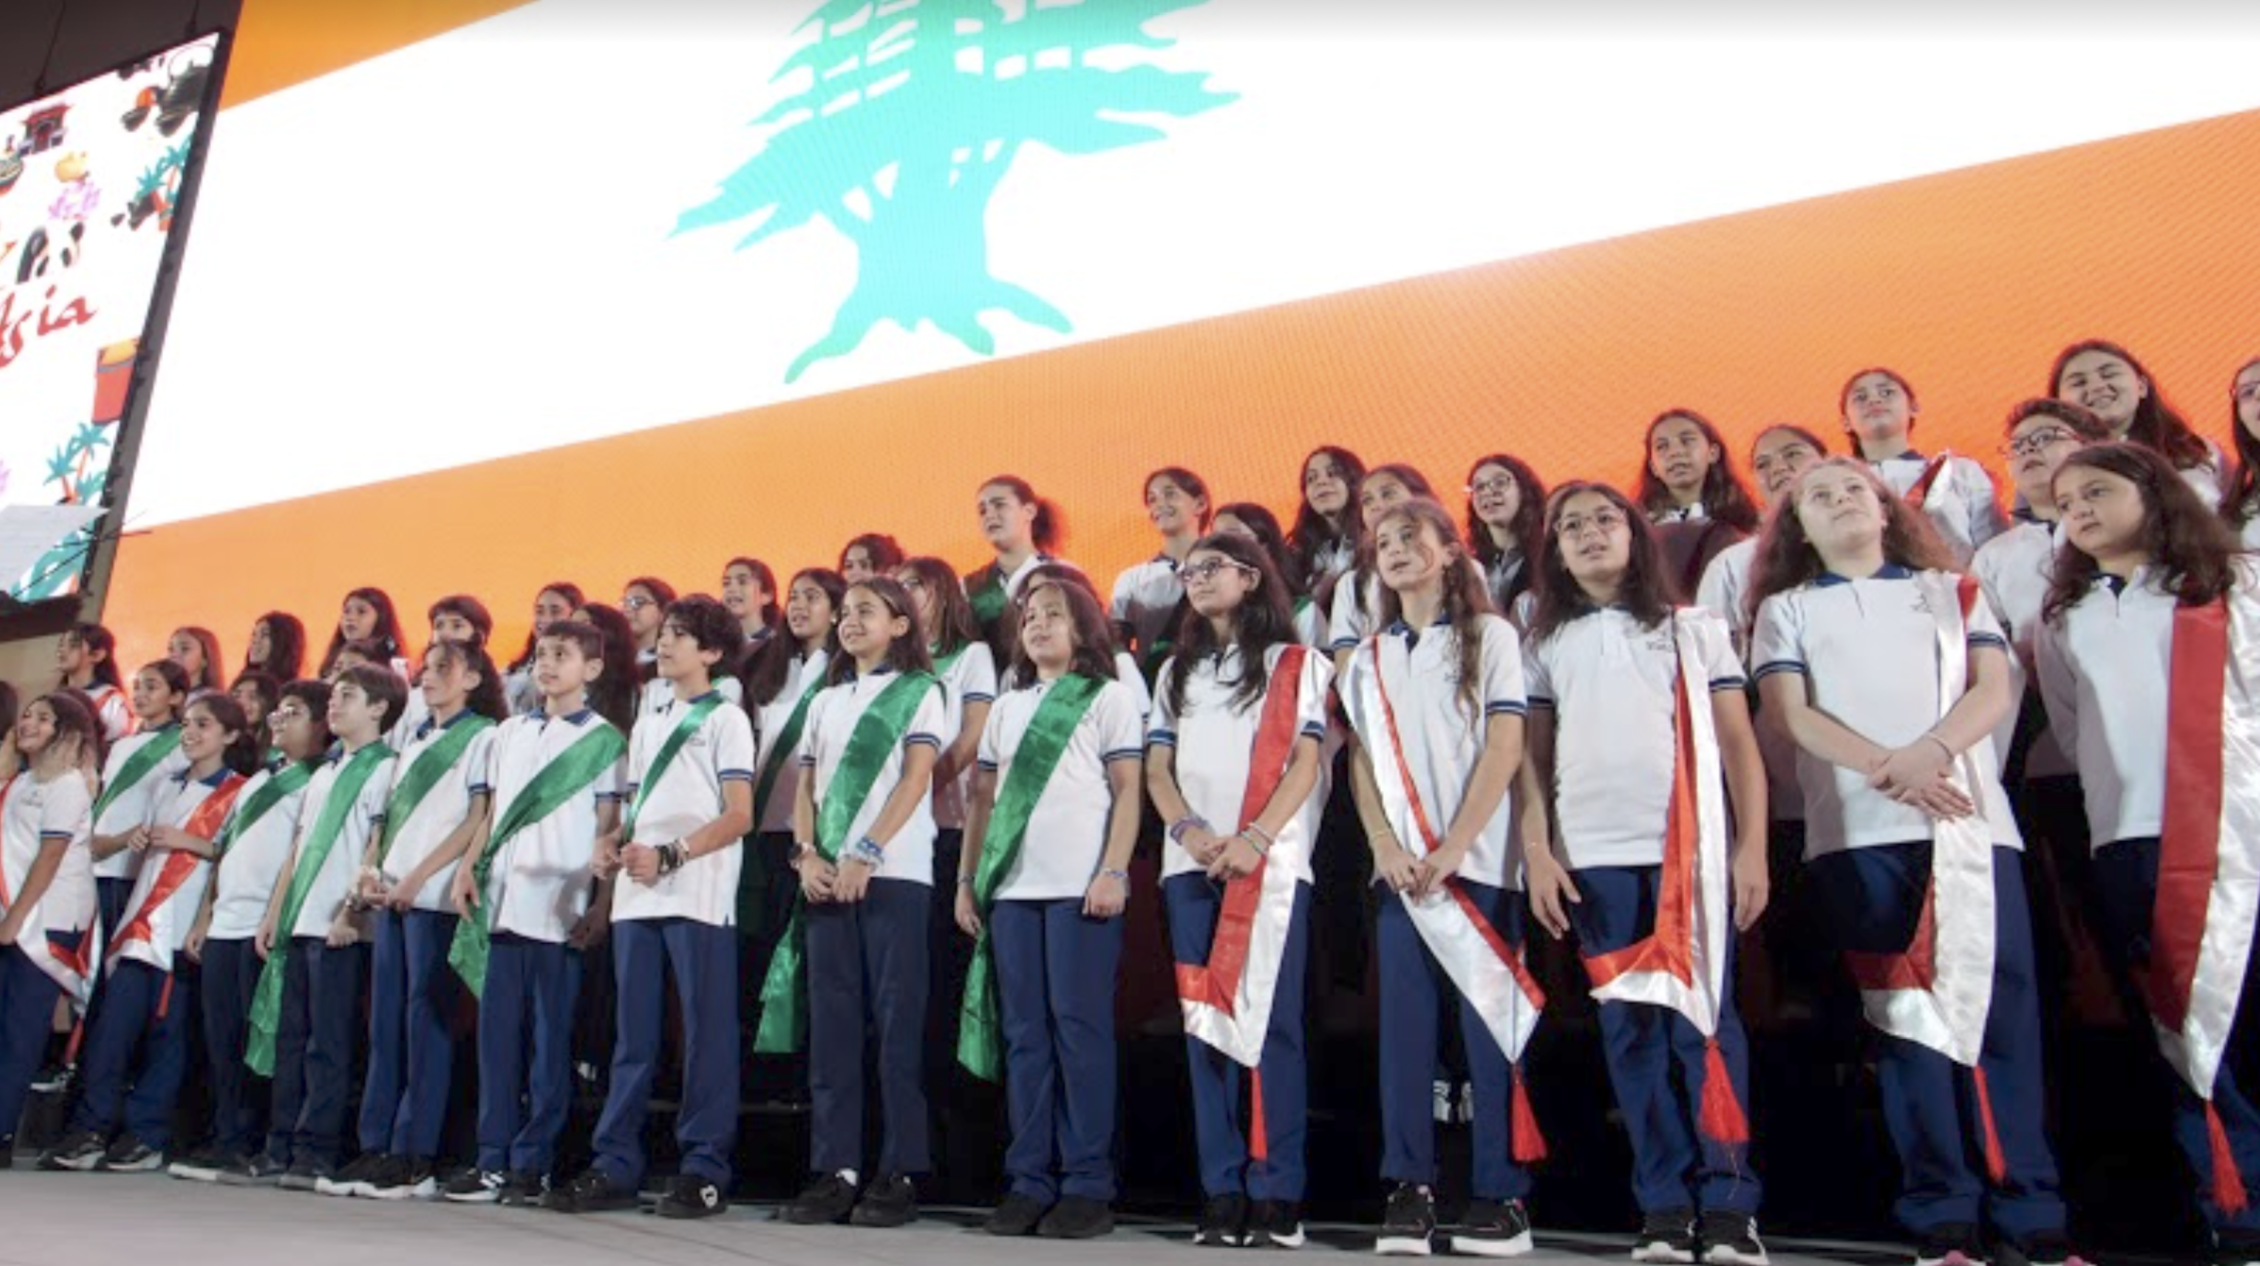 A choir of children wearing red and green sashes perform a song on stage in front of a giant Lebanese flag.